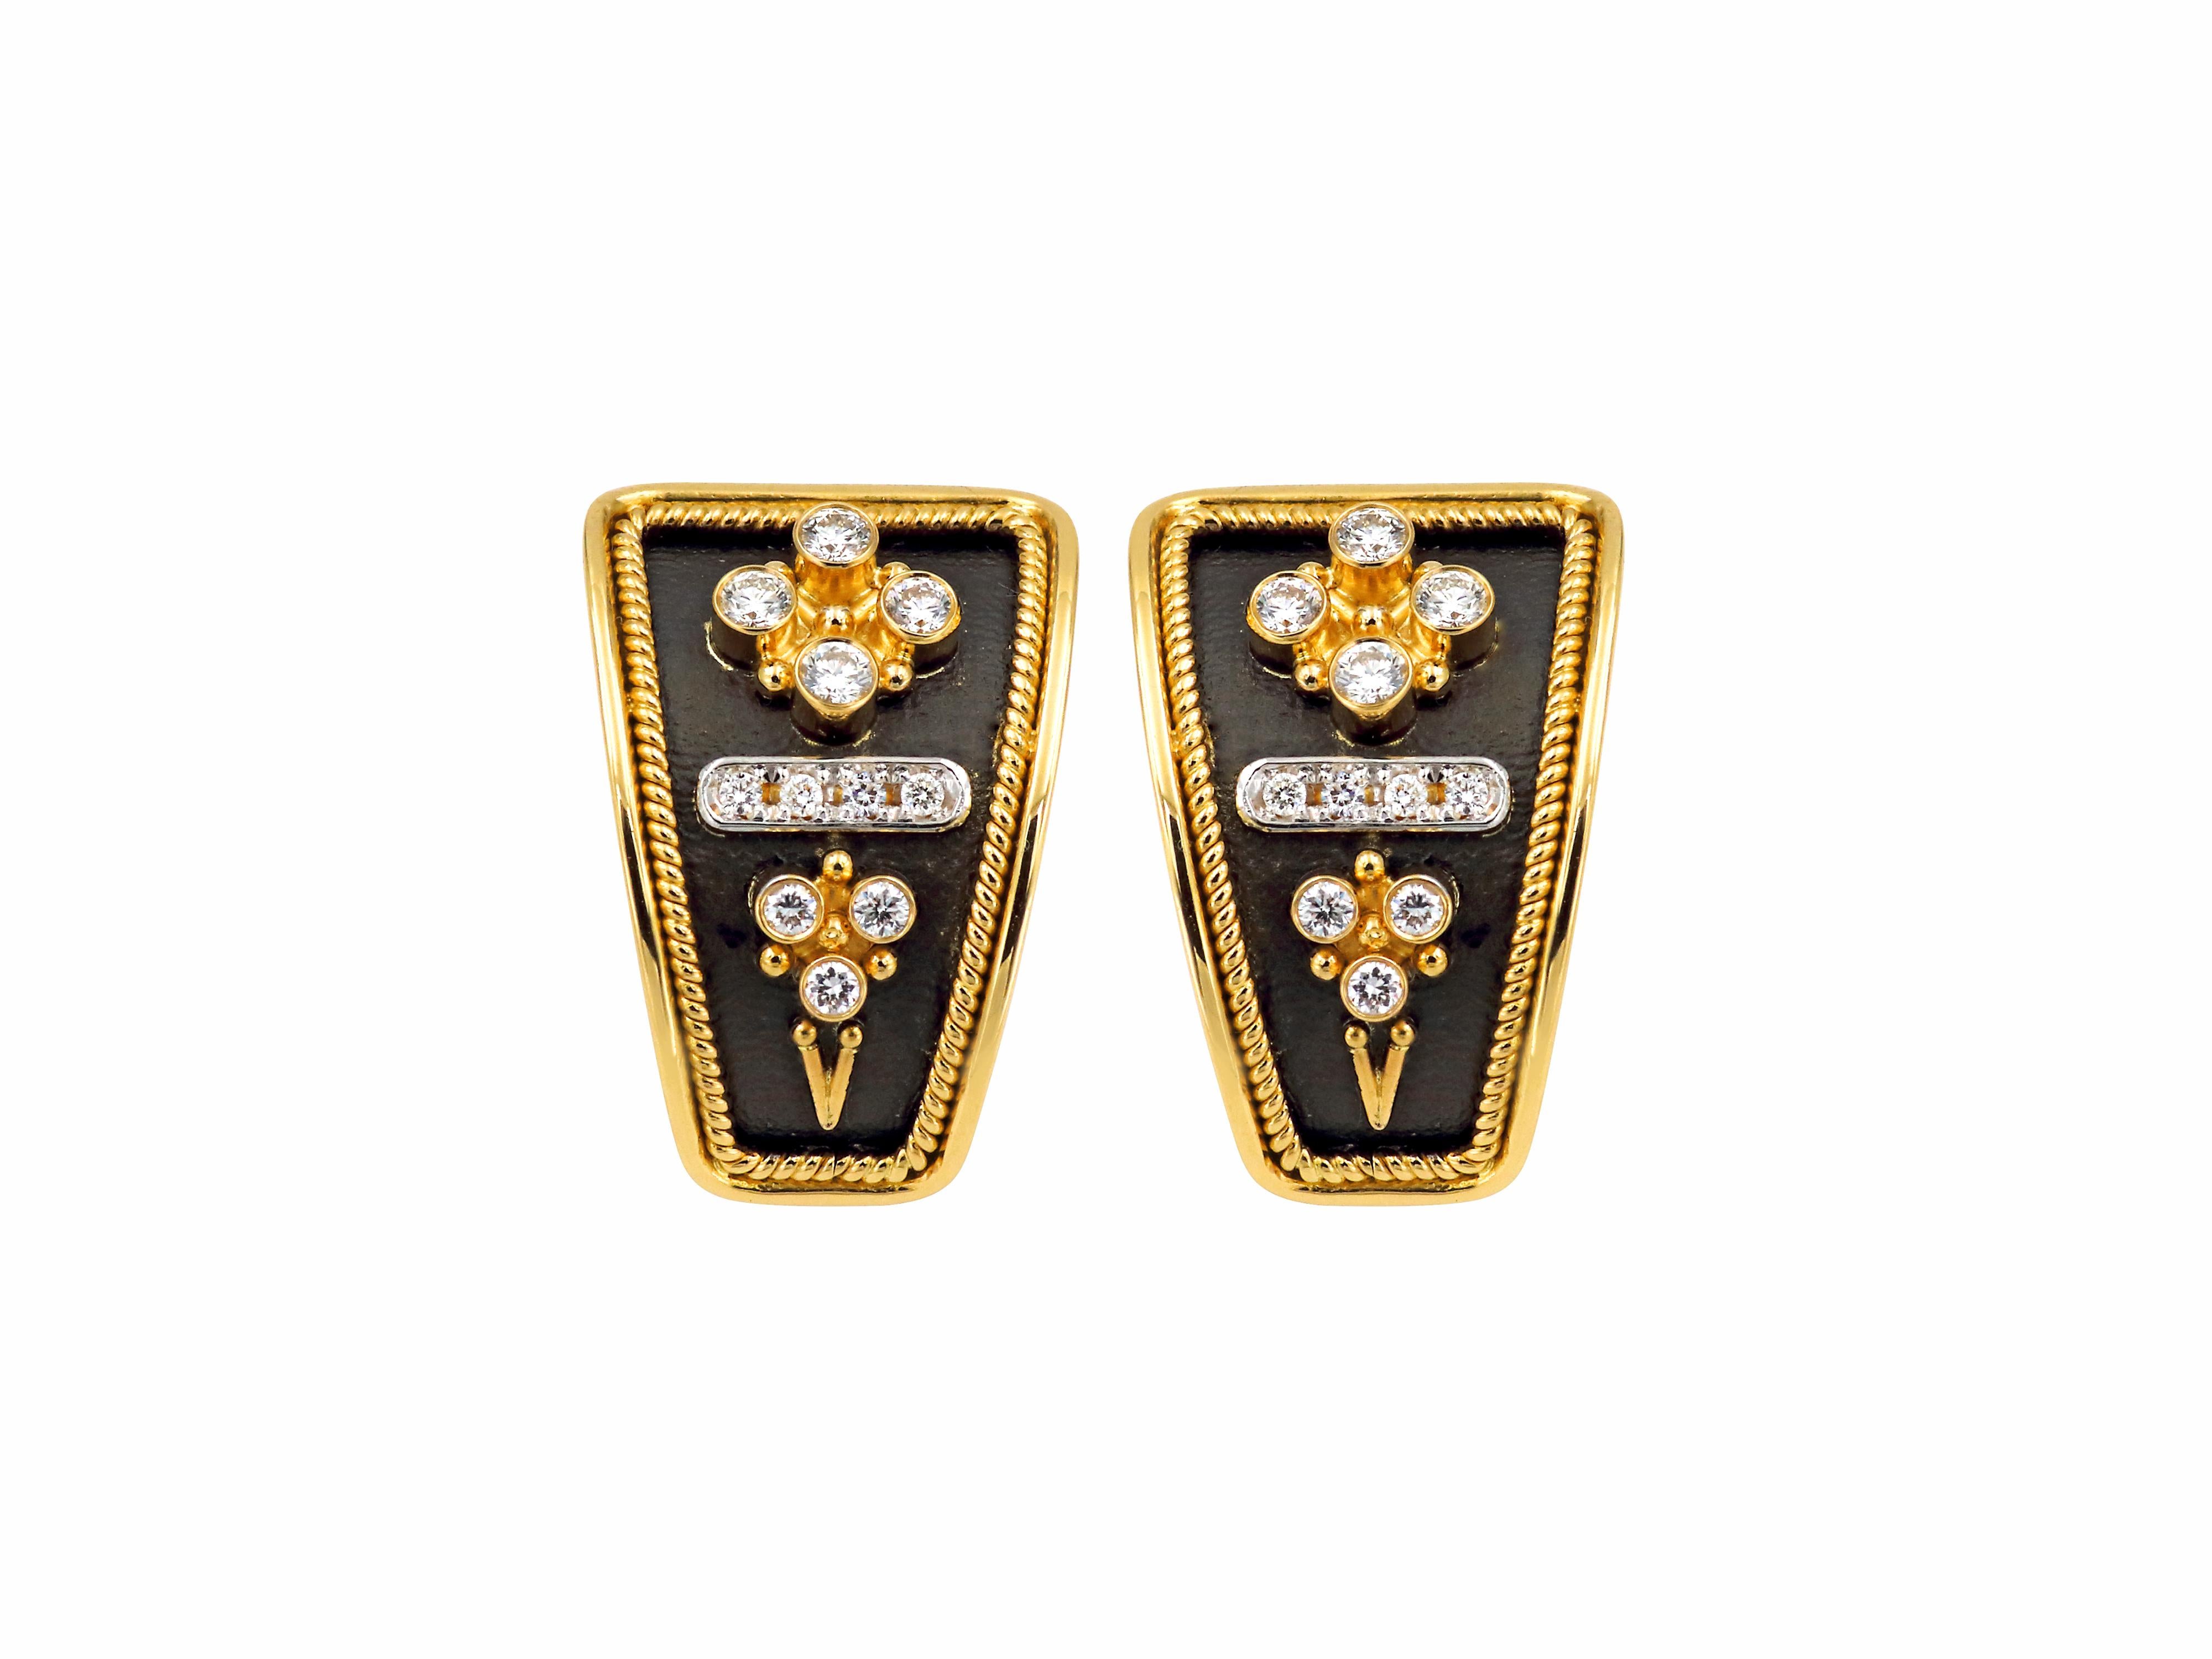 Byzantine inspired earrings handmade in Athens Greece by Dimos of the Noir Collection, in 18 karat white and yellow gold insert with 0.52 carat natural brilliant cut diamonds. Those friends clip earrings with post and a clip give you a firm and safe